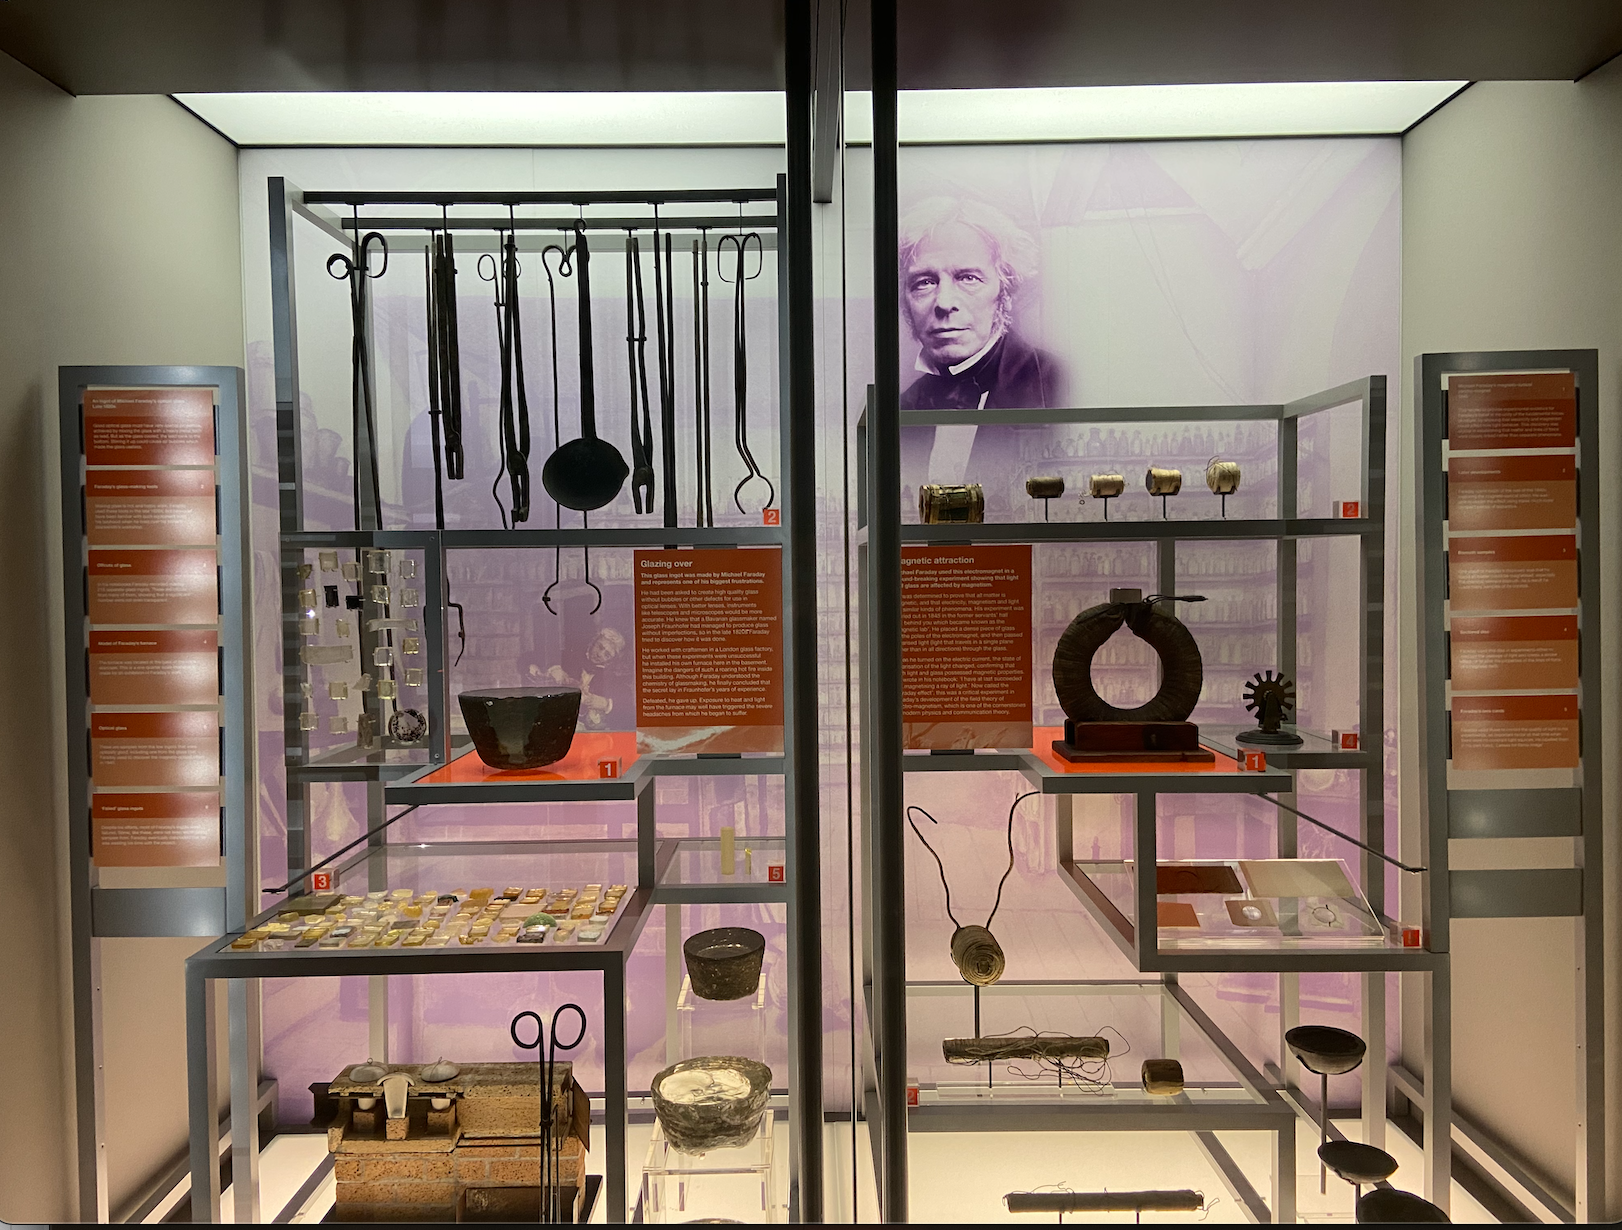 Lots of scientific equipment behind glass panes in two sections, white walls with one purple pictures of a scientist, clear flooring, 11 orange rectangular captions, two orange square captions and metal shelving